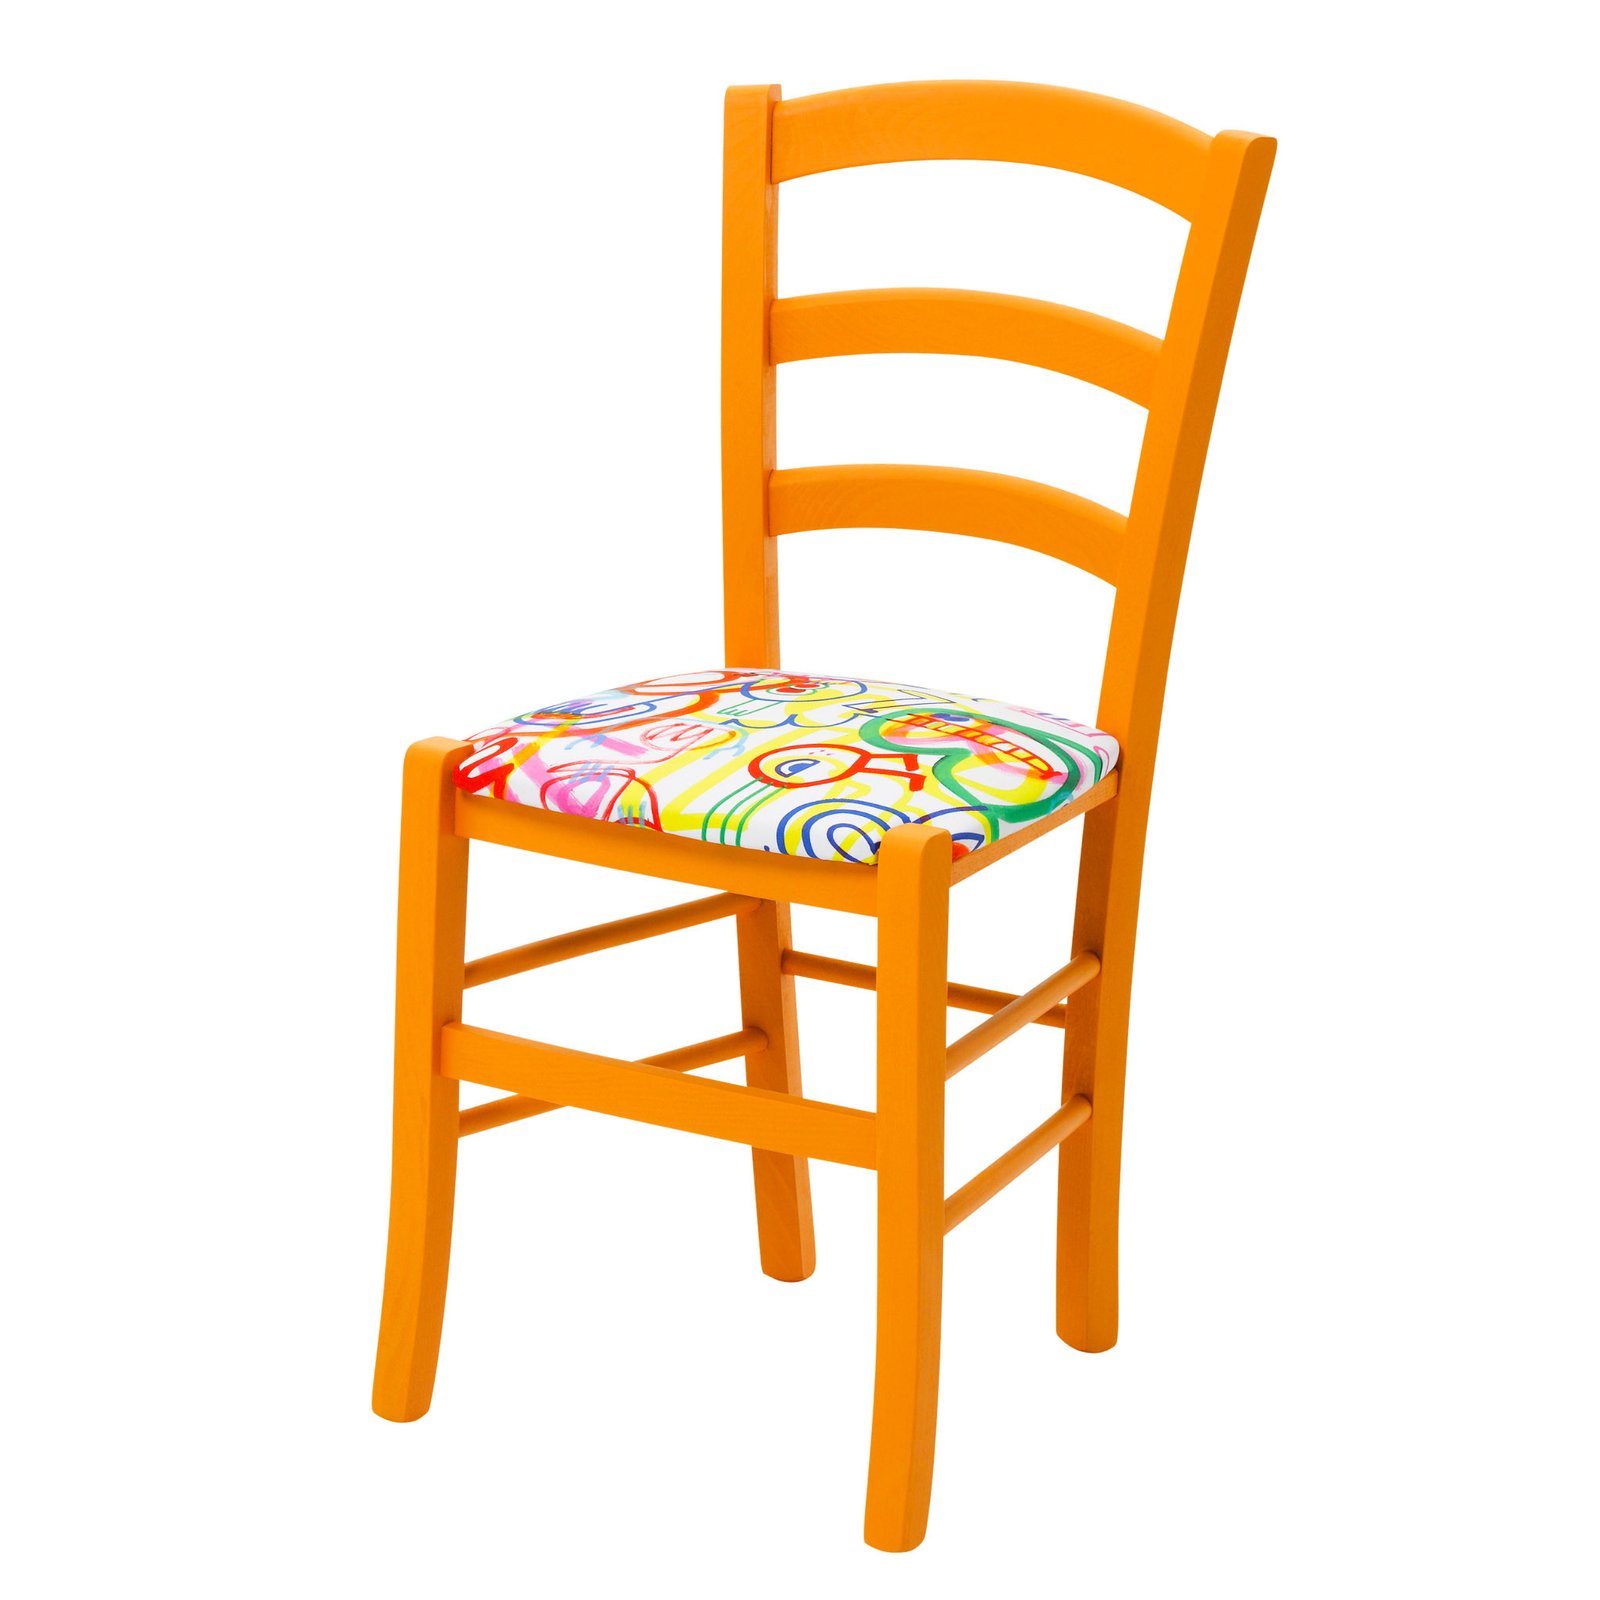 Orange Kitchen Chairs Daisy By Cheeky Chairs In Orange Doodles